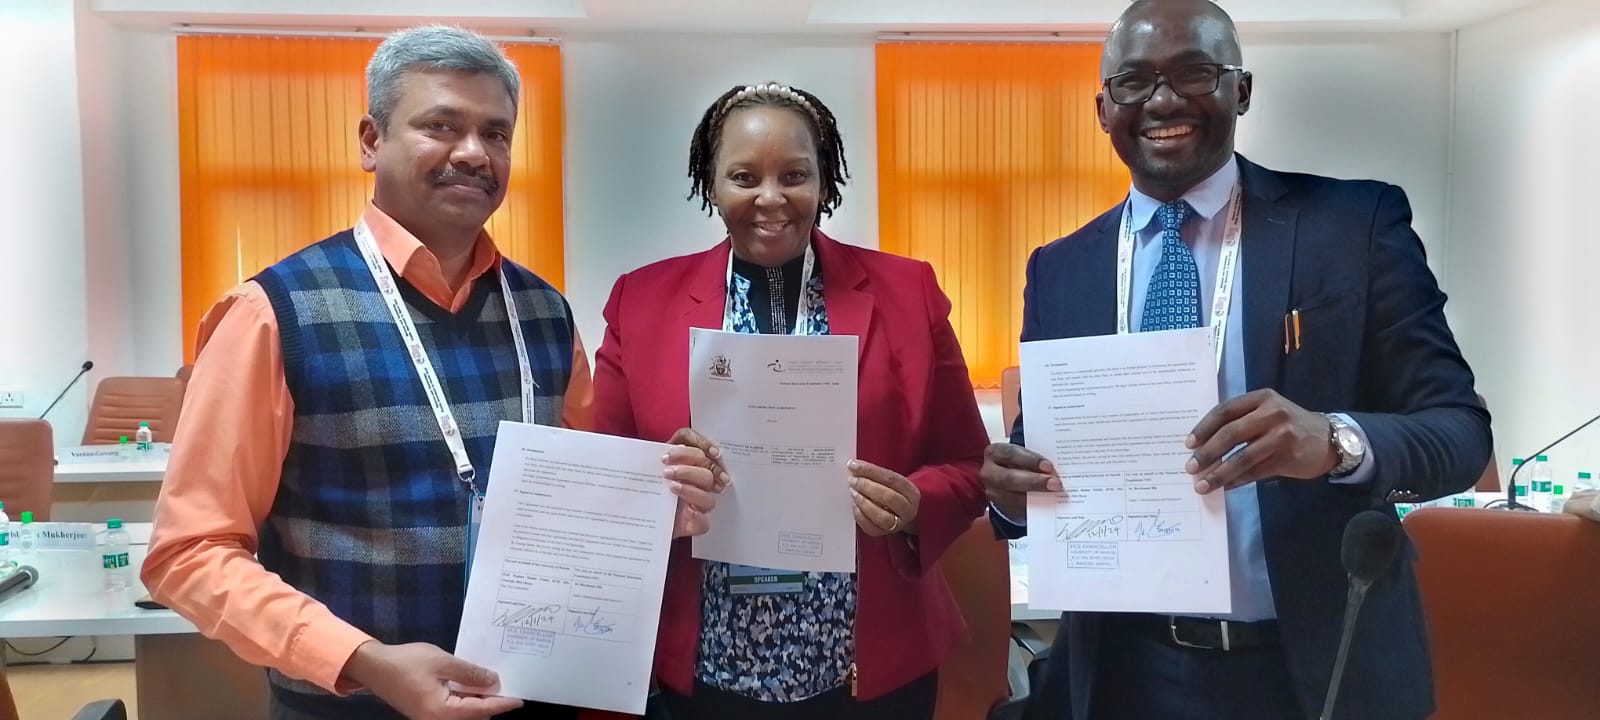 NIF CEO and Head of Administration Scientist Dr. Ravikumar, Prof. Mary Kinoti( Director, Innovation and IPMO) and Dr. OmosaOchwang'i display the signed collaborative agreement in New Delhi, India.